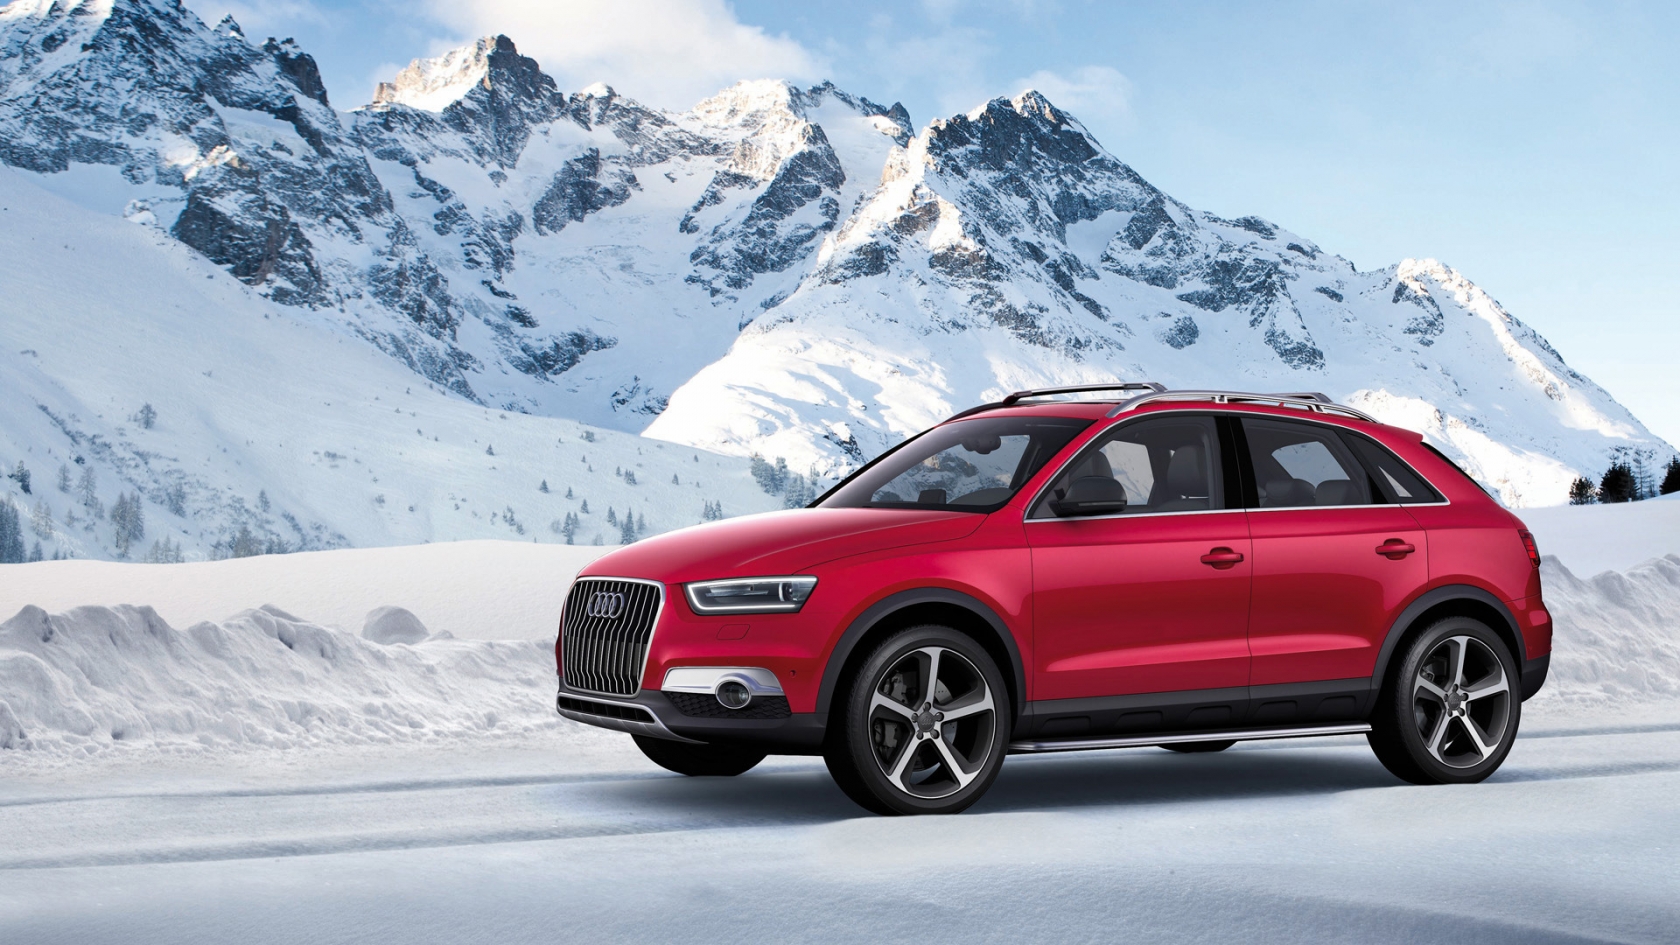 Audi Q3 Vail 2012 for 1680 x 945 HDTV resolution